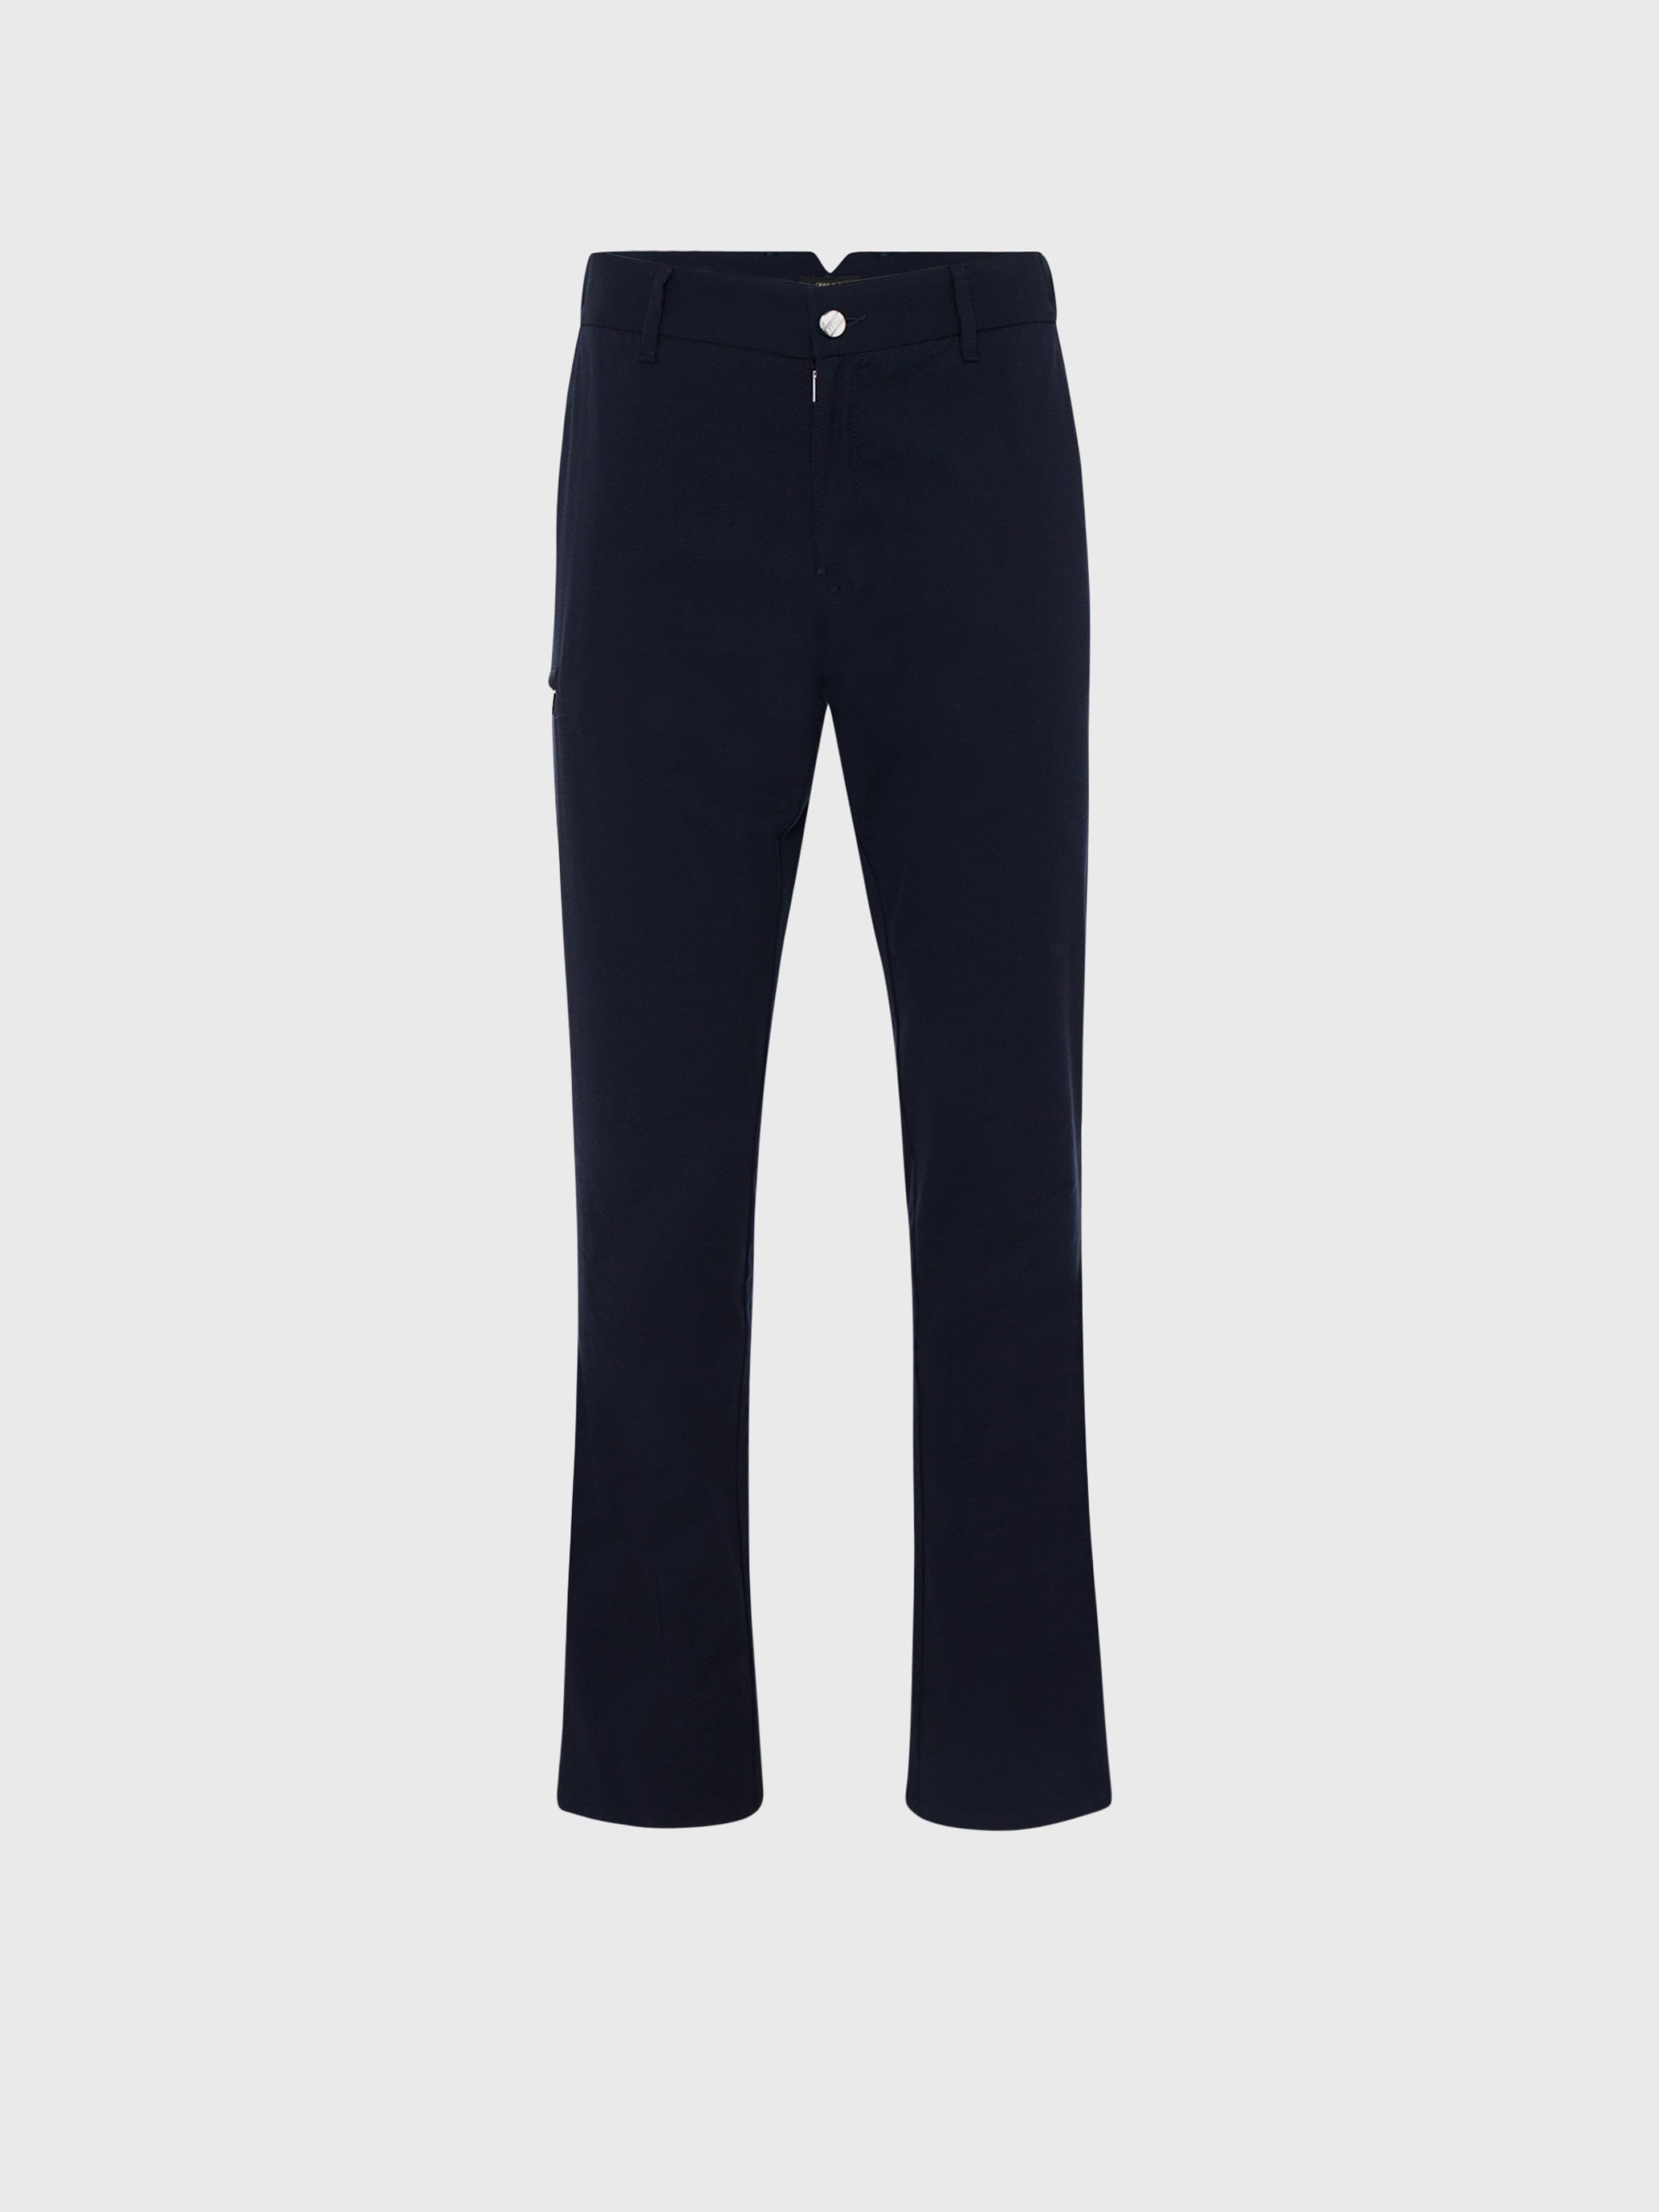 Slim Fit Cotton and Silk Trousers